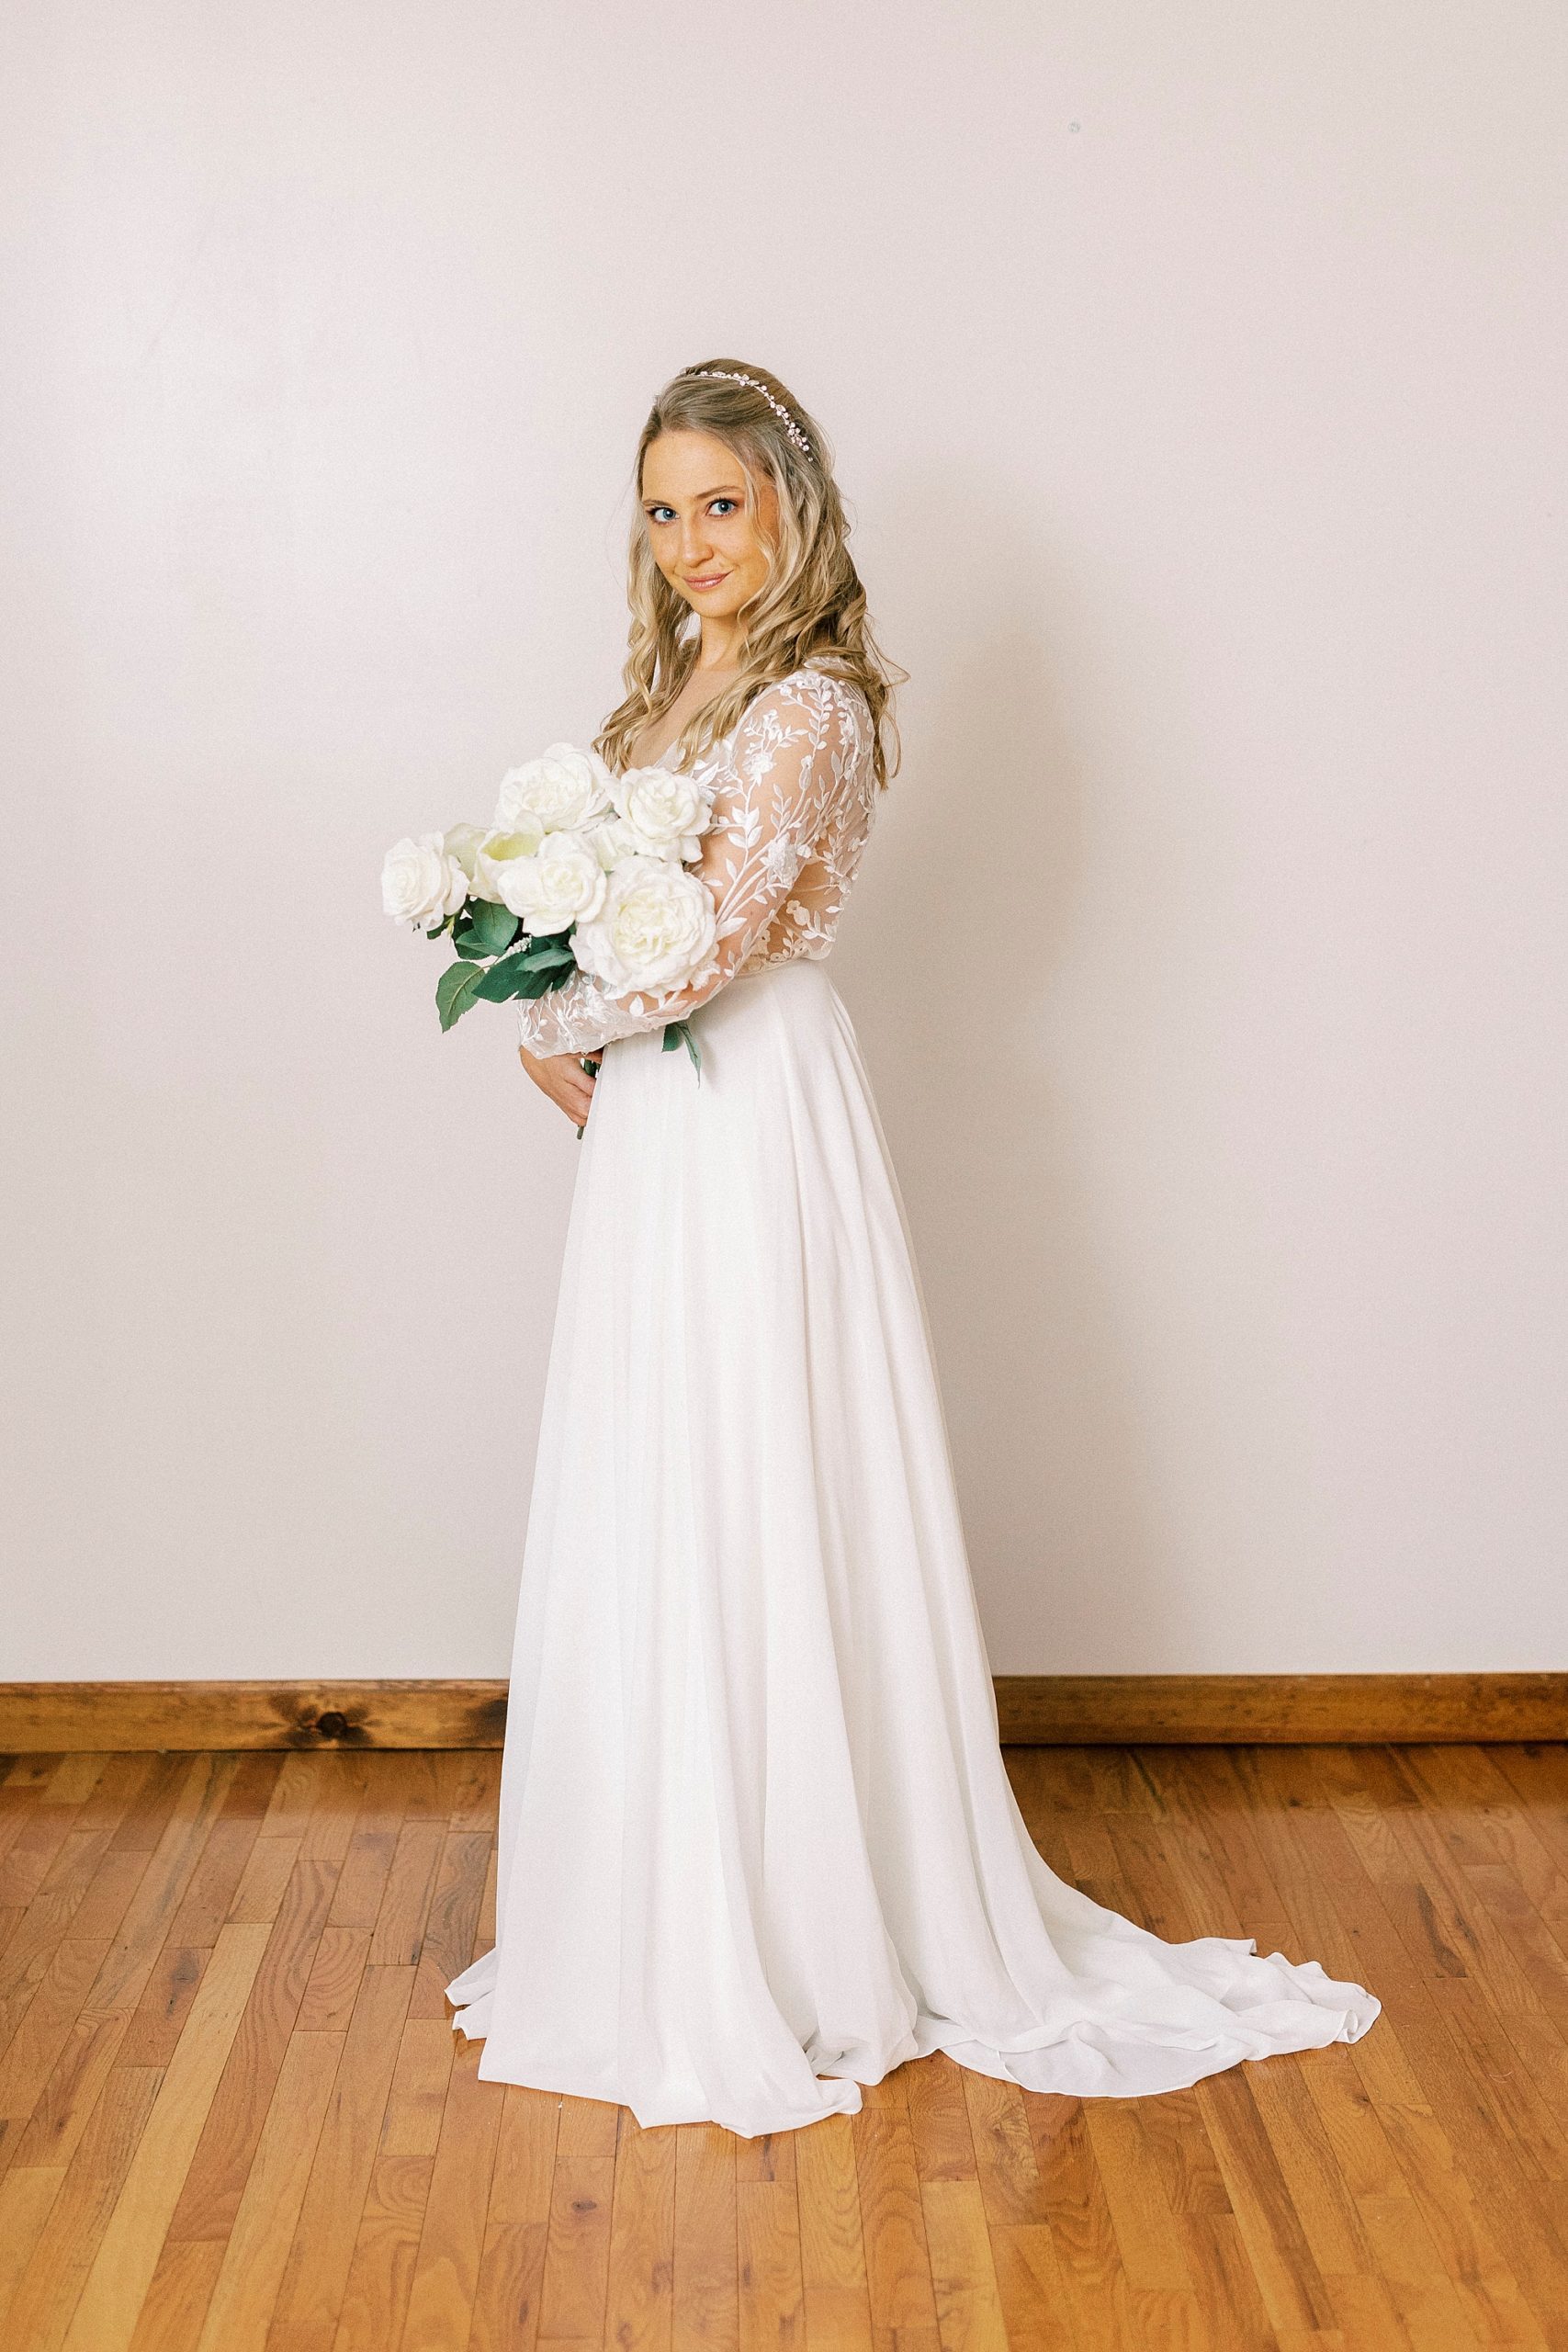 bride holds white bouquet during bridal portraits in home